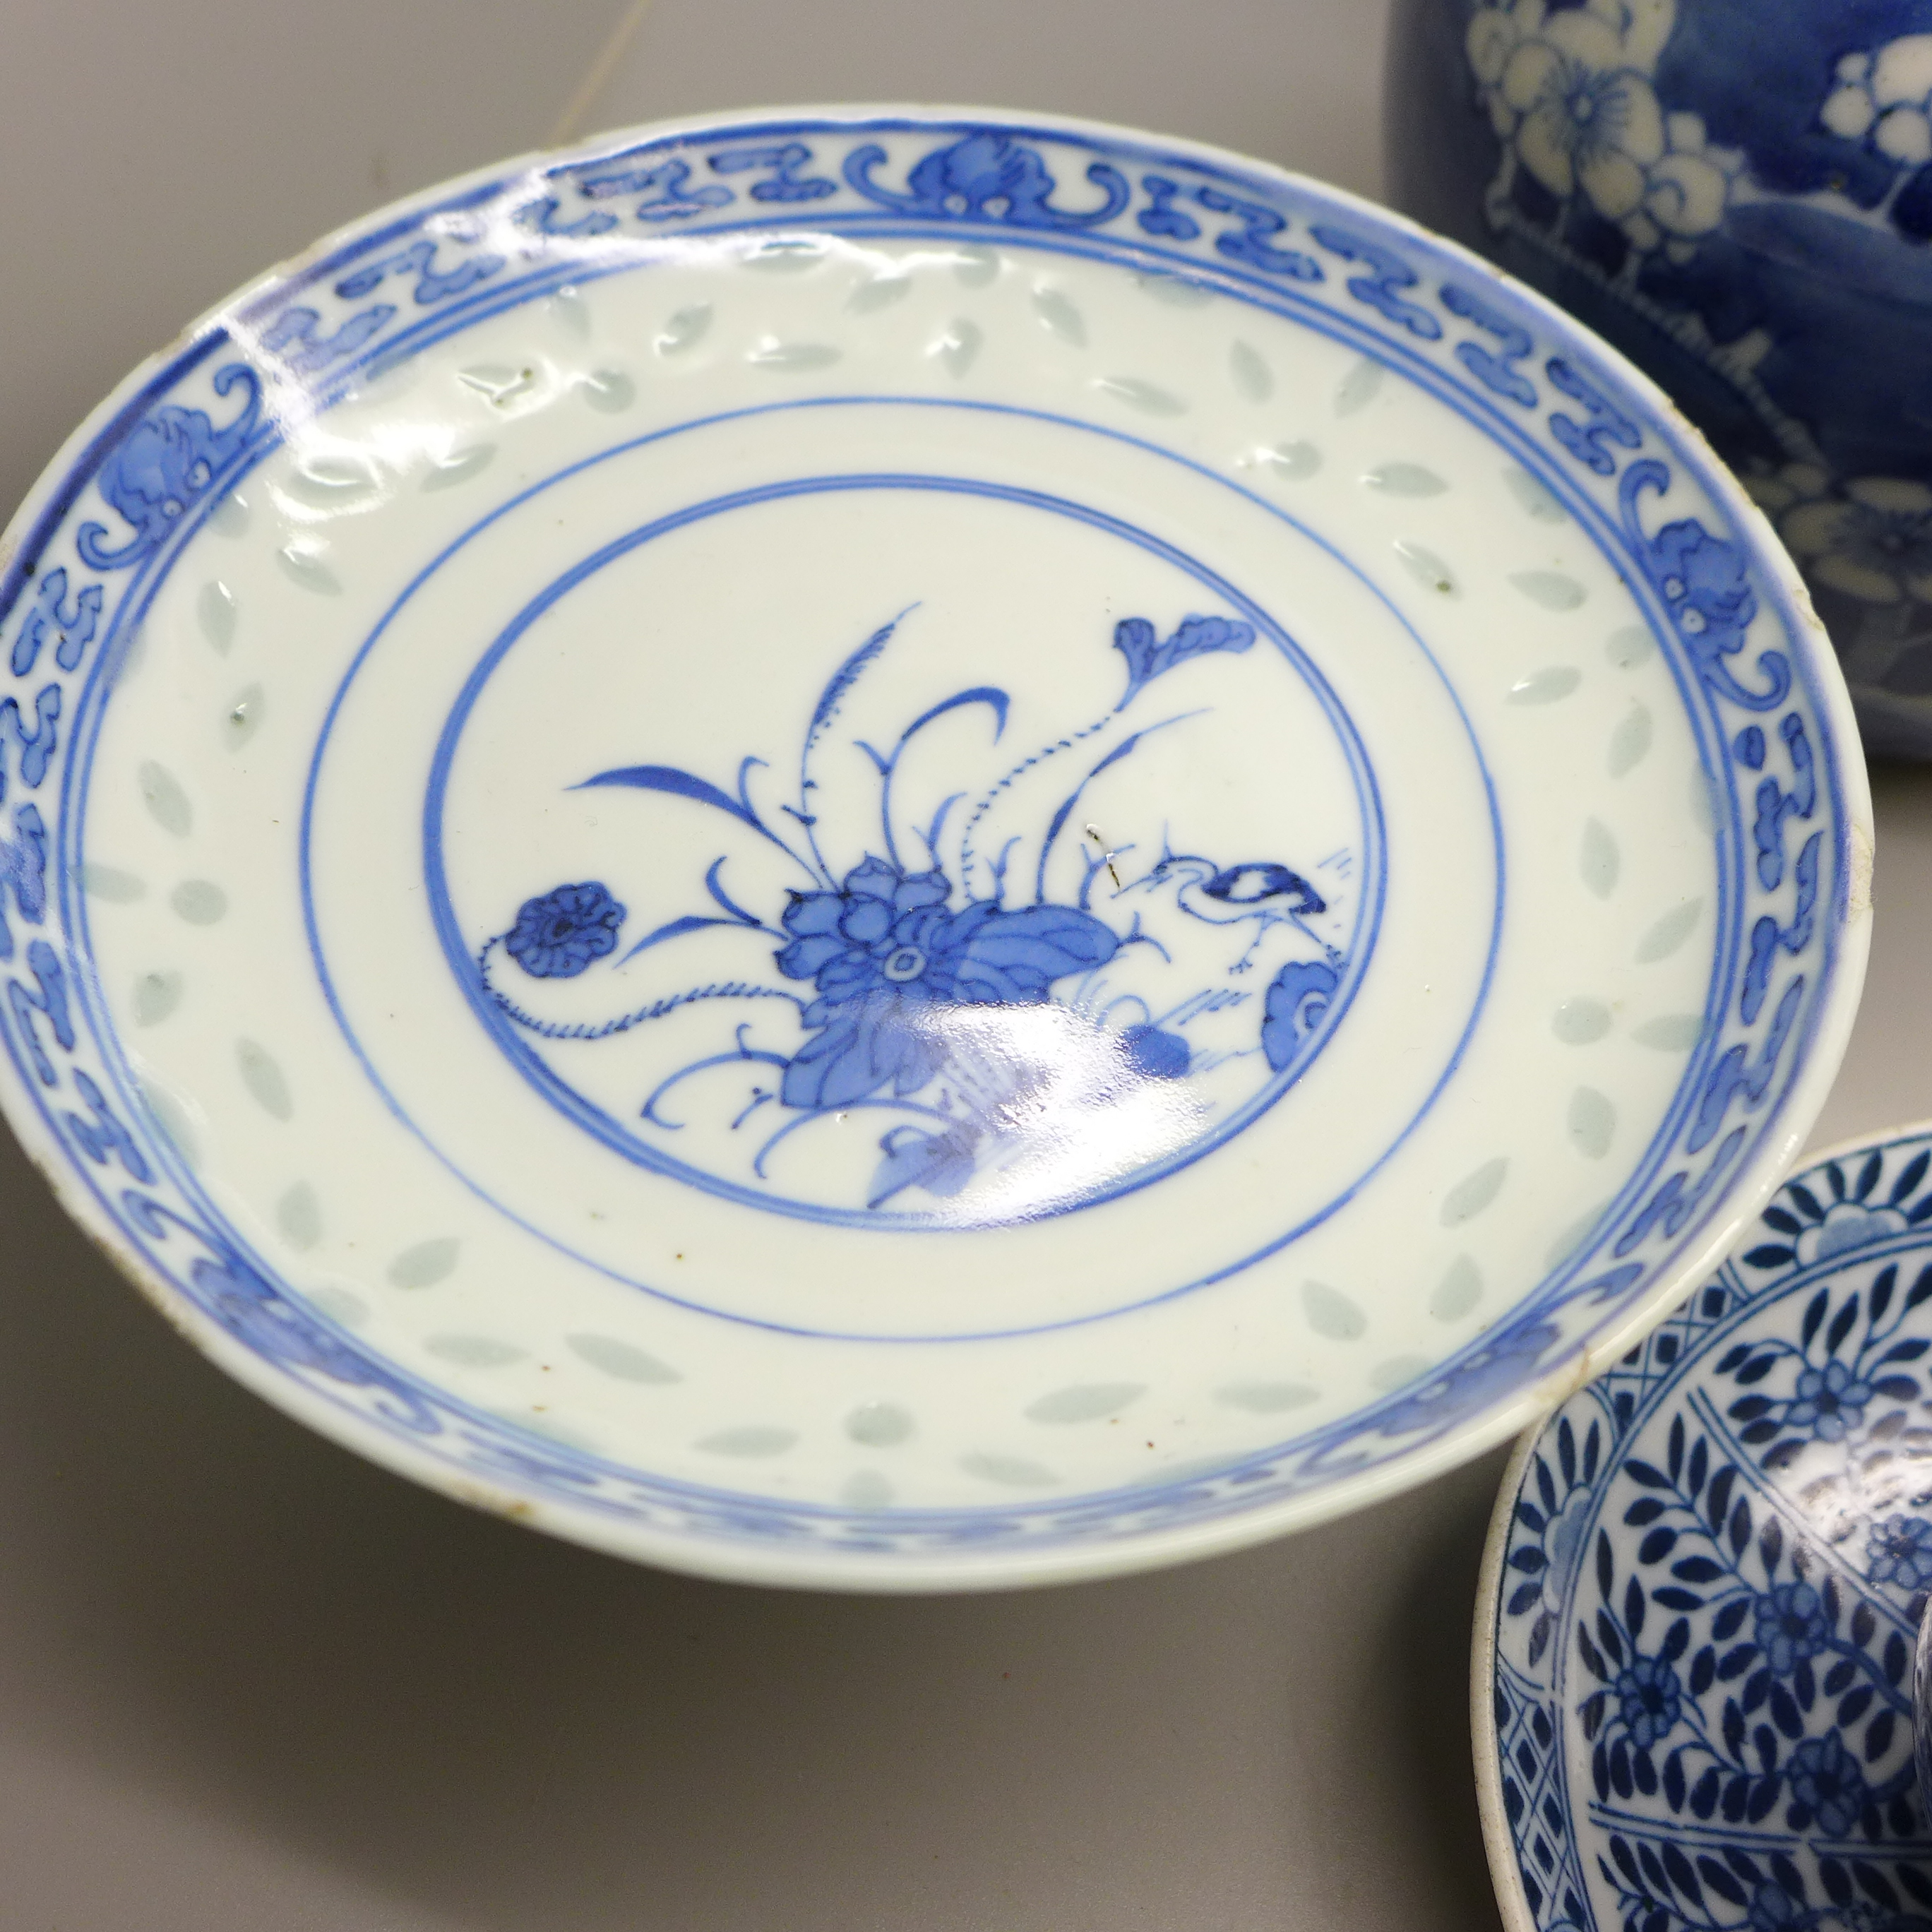 19th Century Chinese porcelain including Boy Flying a Kite pattern teapot, a small footed comport, - Image 2 of 6